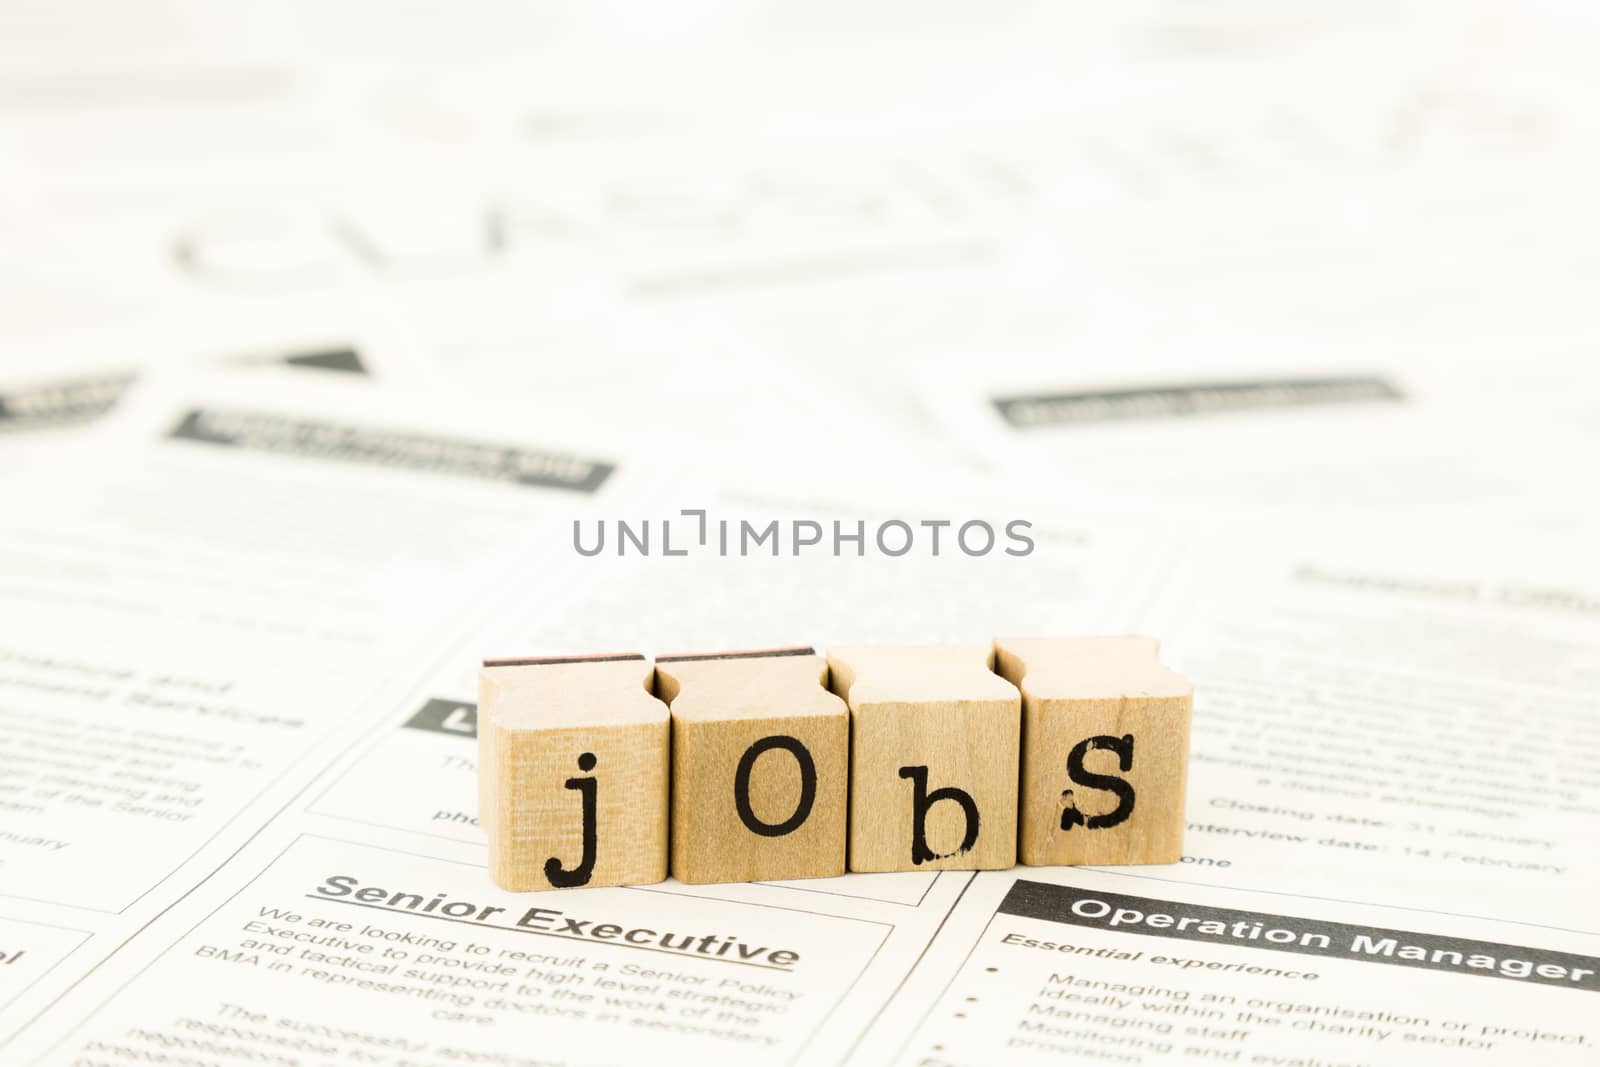 closeup jobs wording on classifieds ads and newspaper, recruitment and employment concepts and ideas